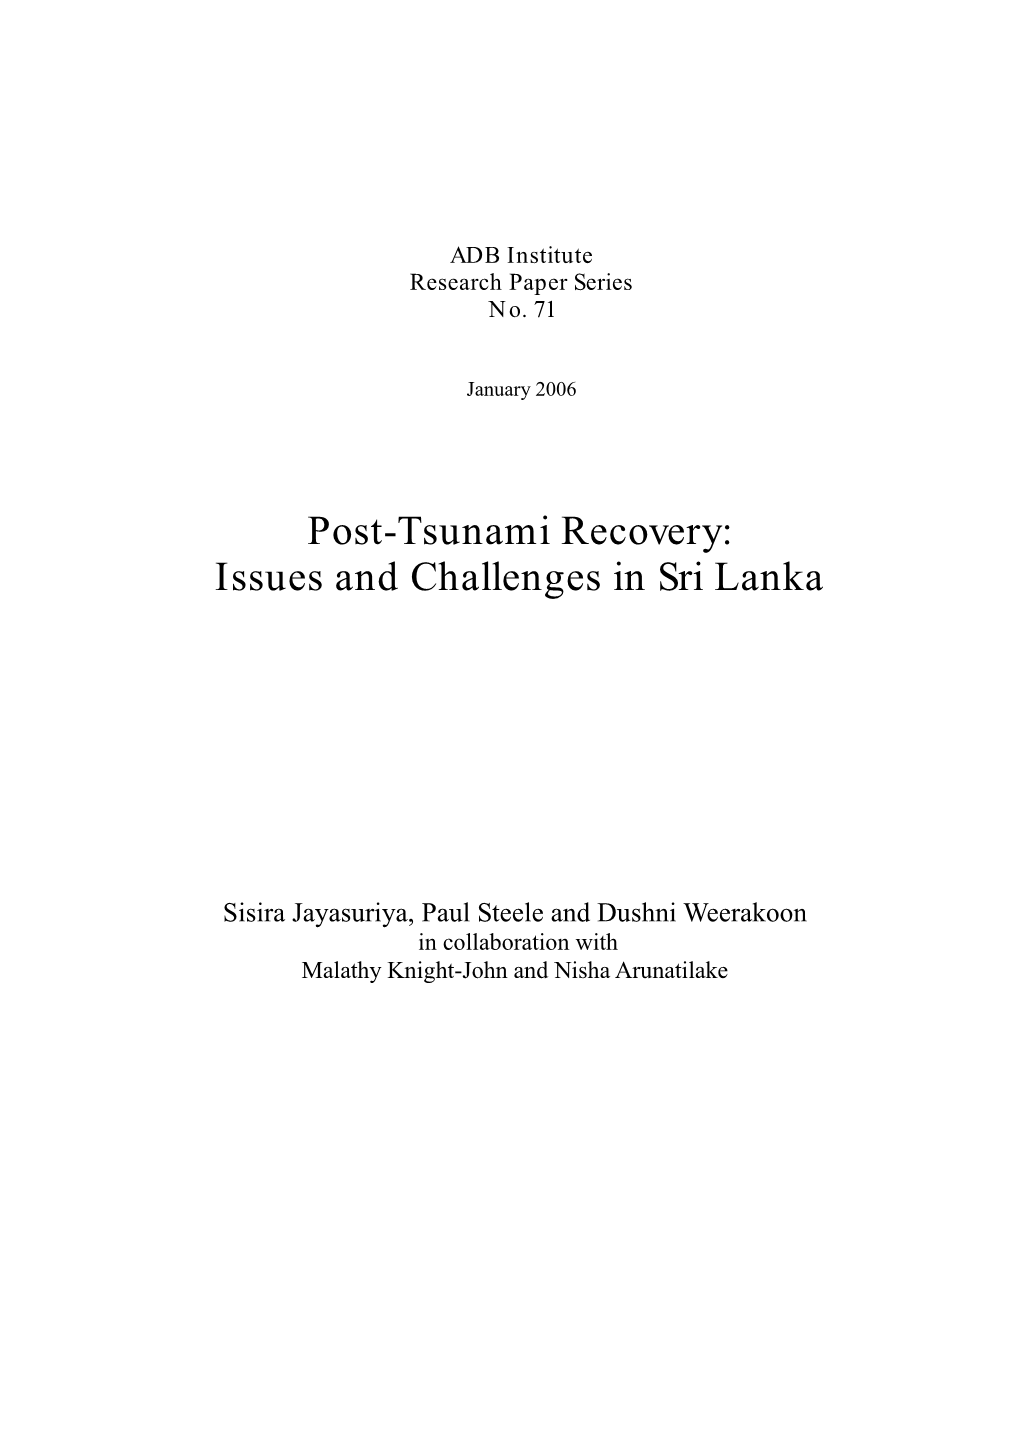 Post-Tsunami Recovery: Issues and Challenges in Sri Lanka